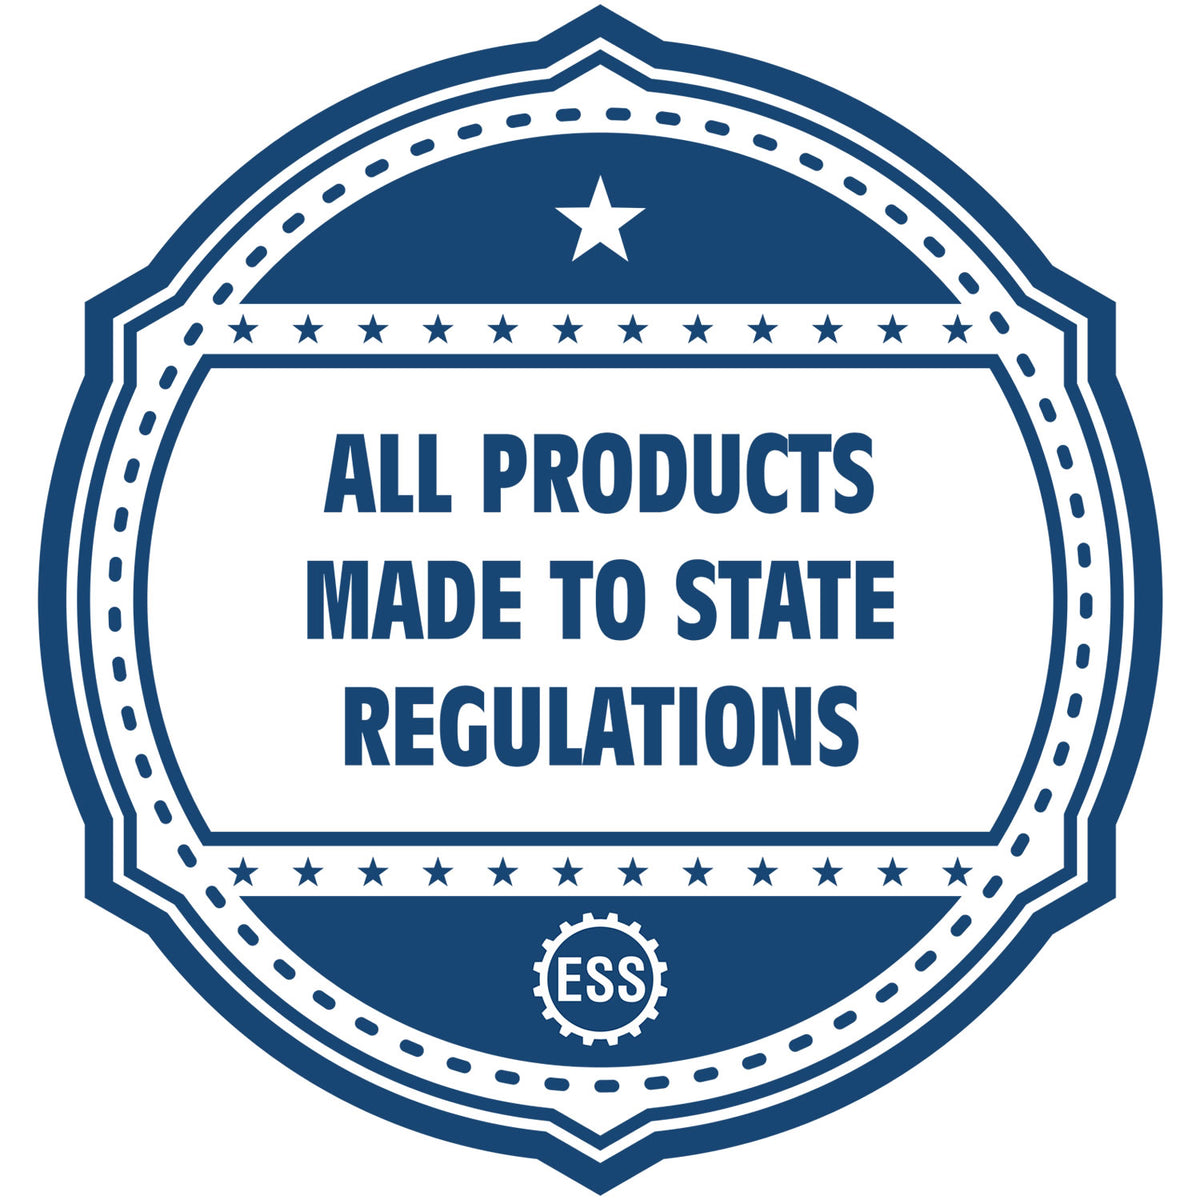 A blue icon or badge for the Massachusetts Geologist Desk Seal showing that this product is made in compliance with state regulations.